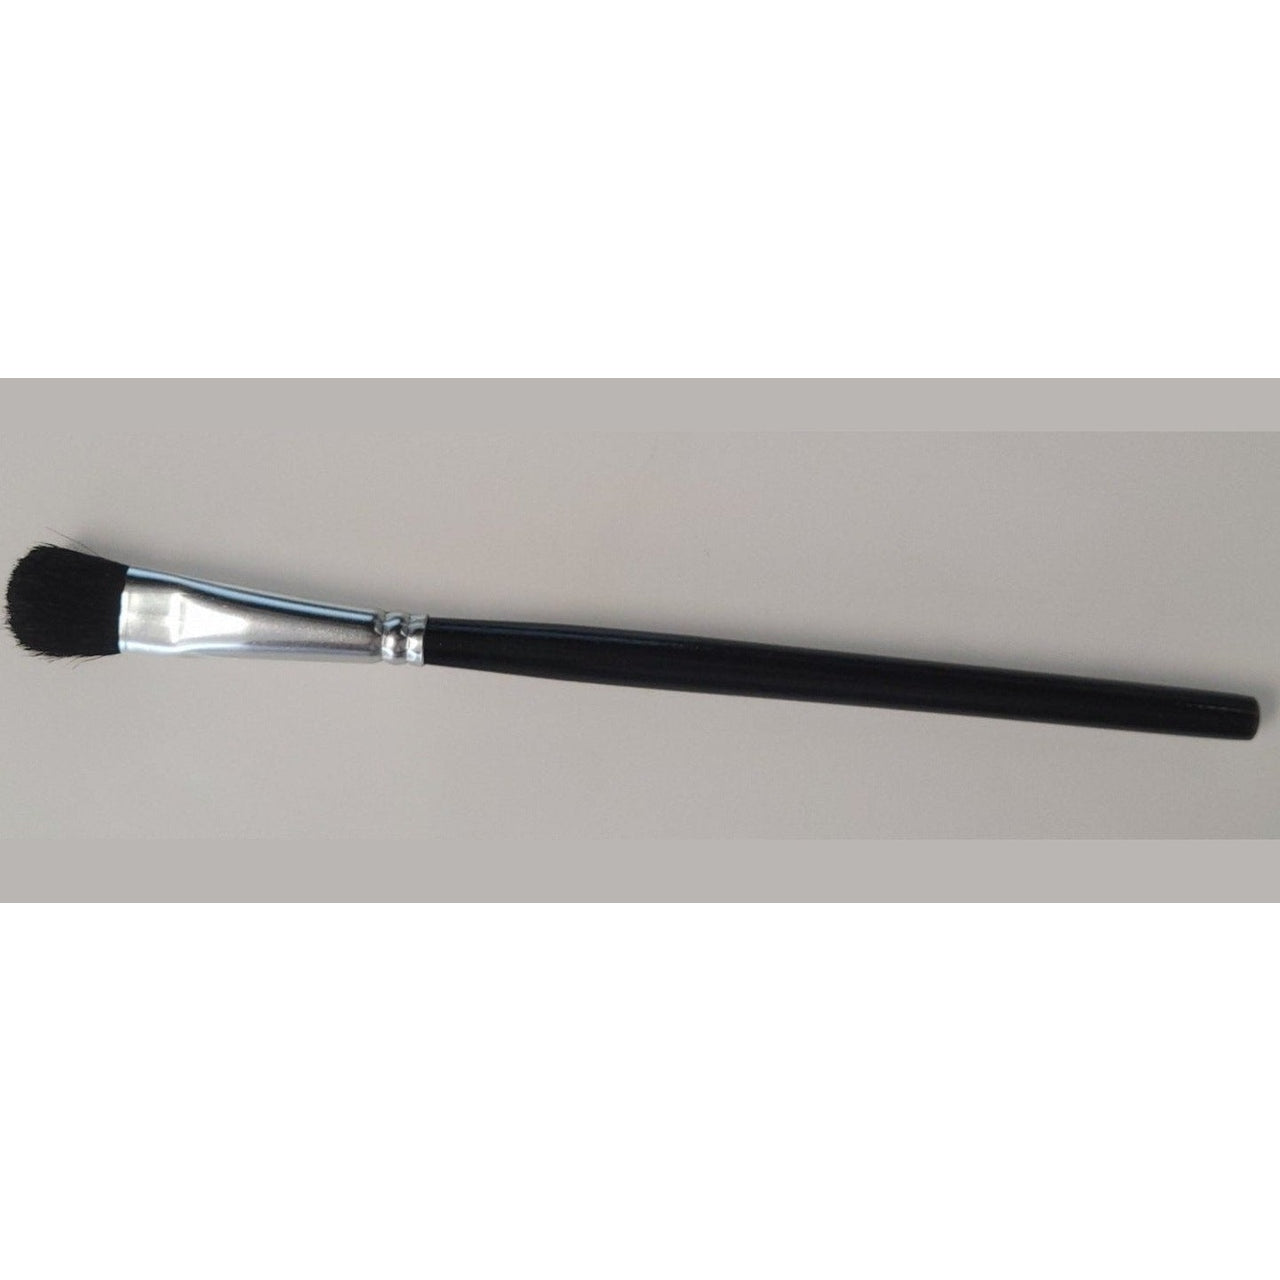 Telescopic Embossing Powder Tool with Retractable Brush - Kat Scrappiness